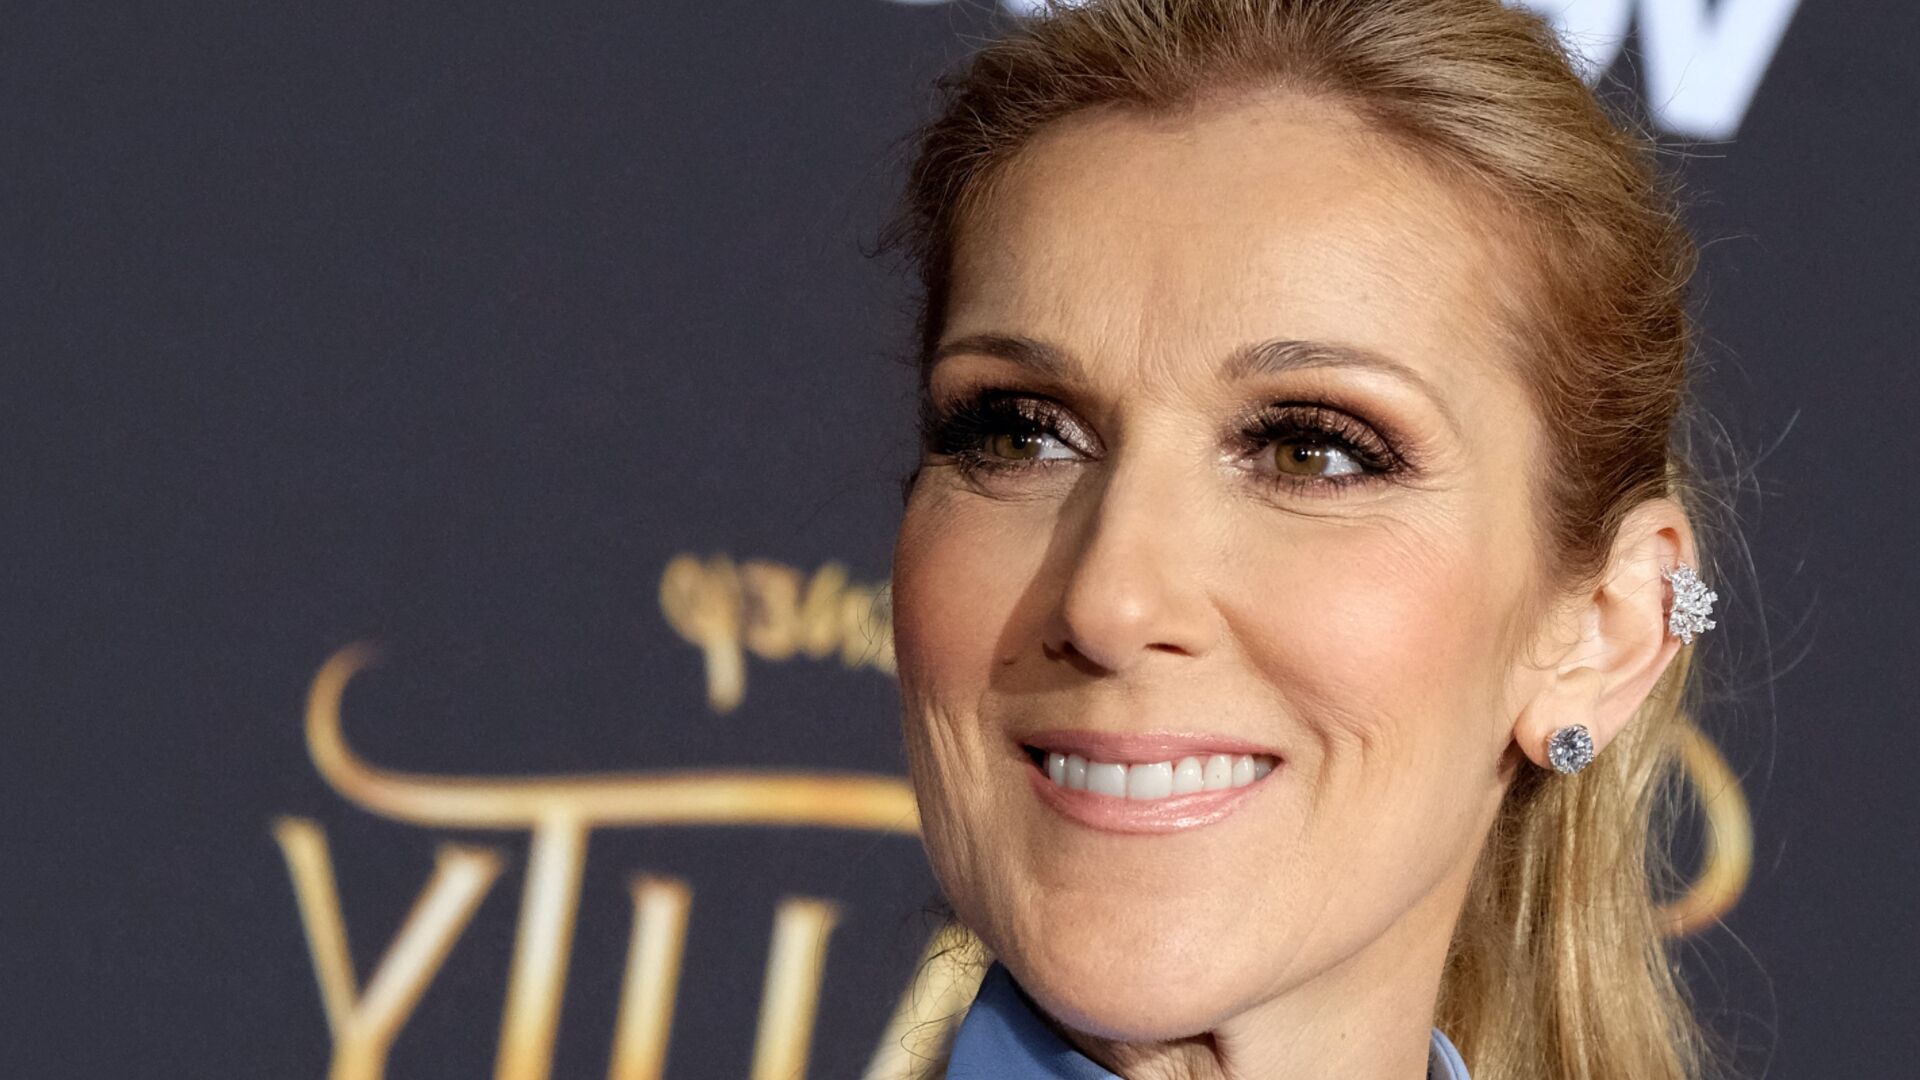 17 Facts About Celine Dion - Facts.net